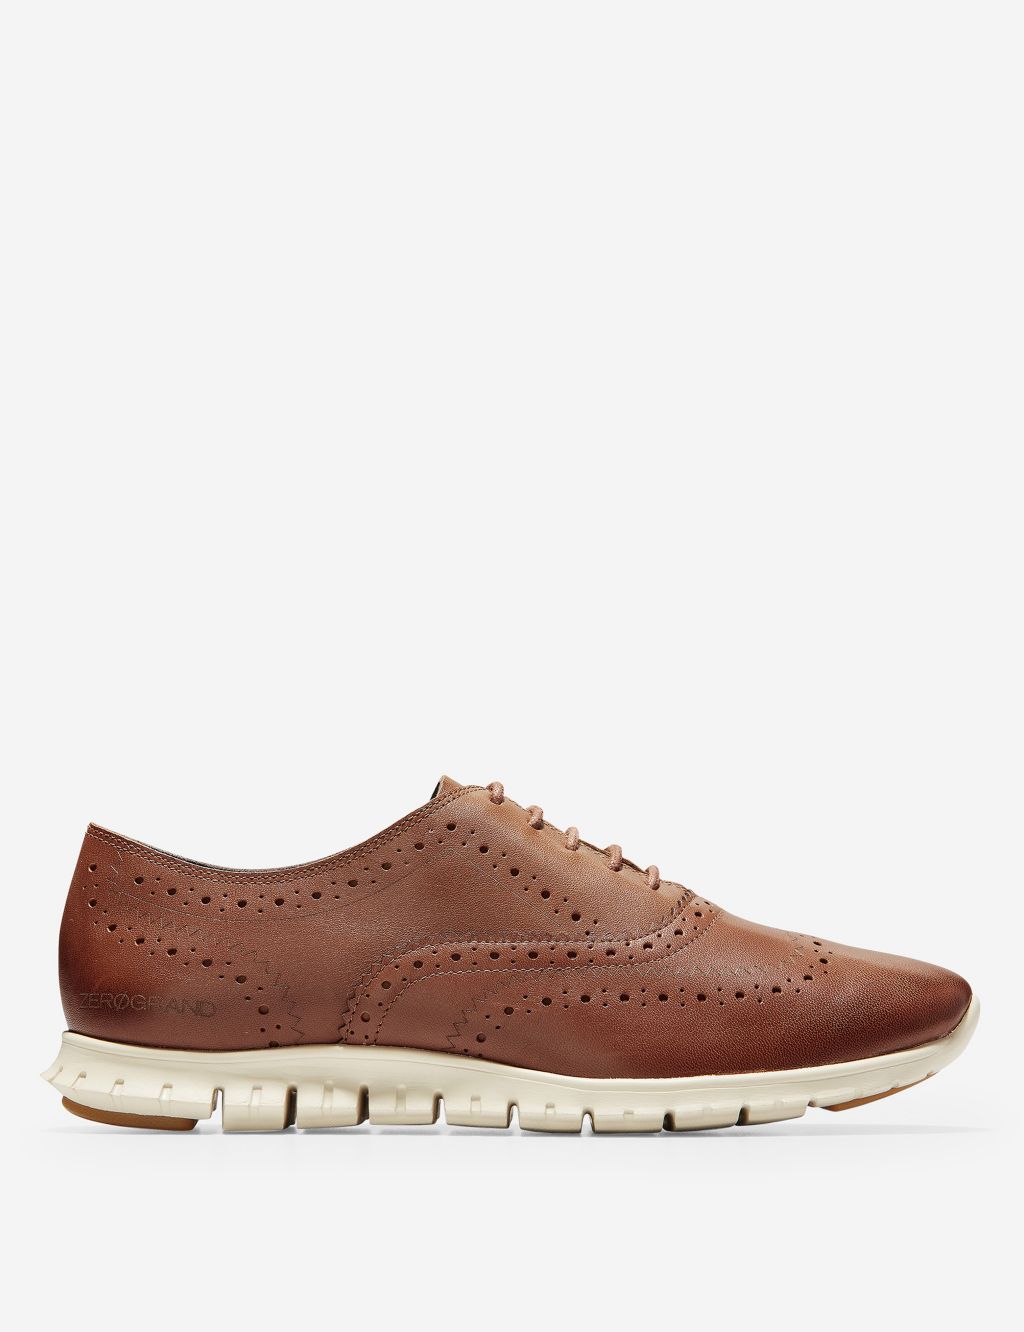 Zerogrand Leather Oxford Shoes image 1